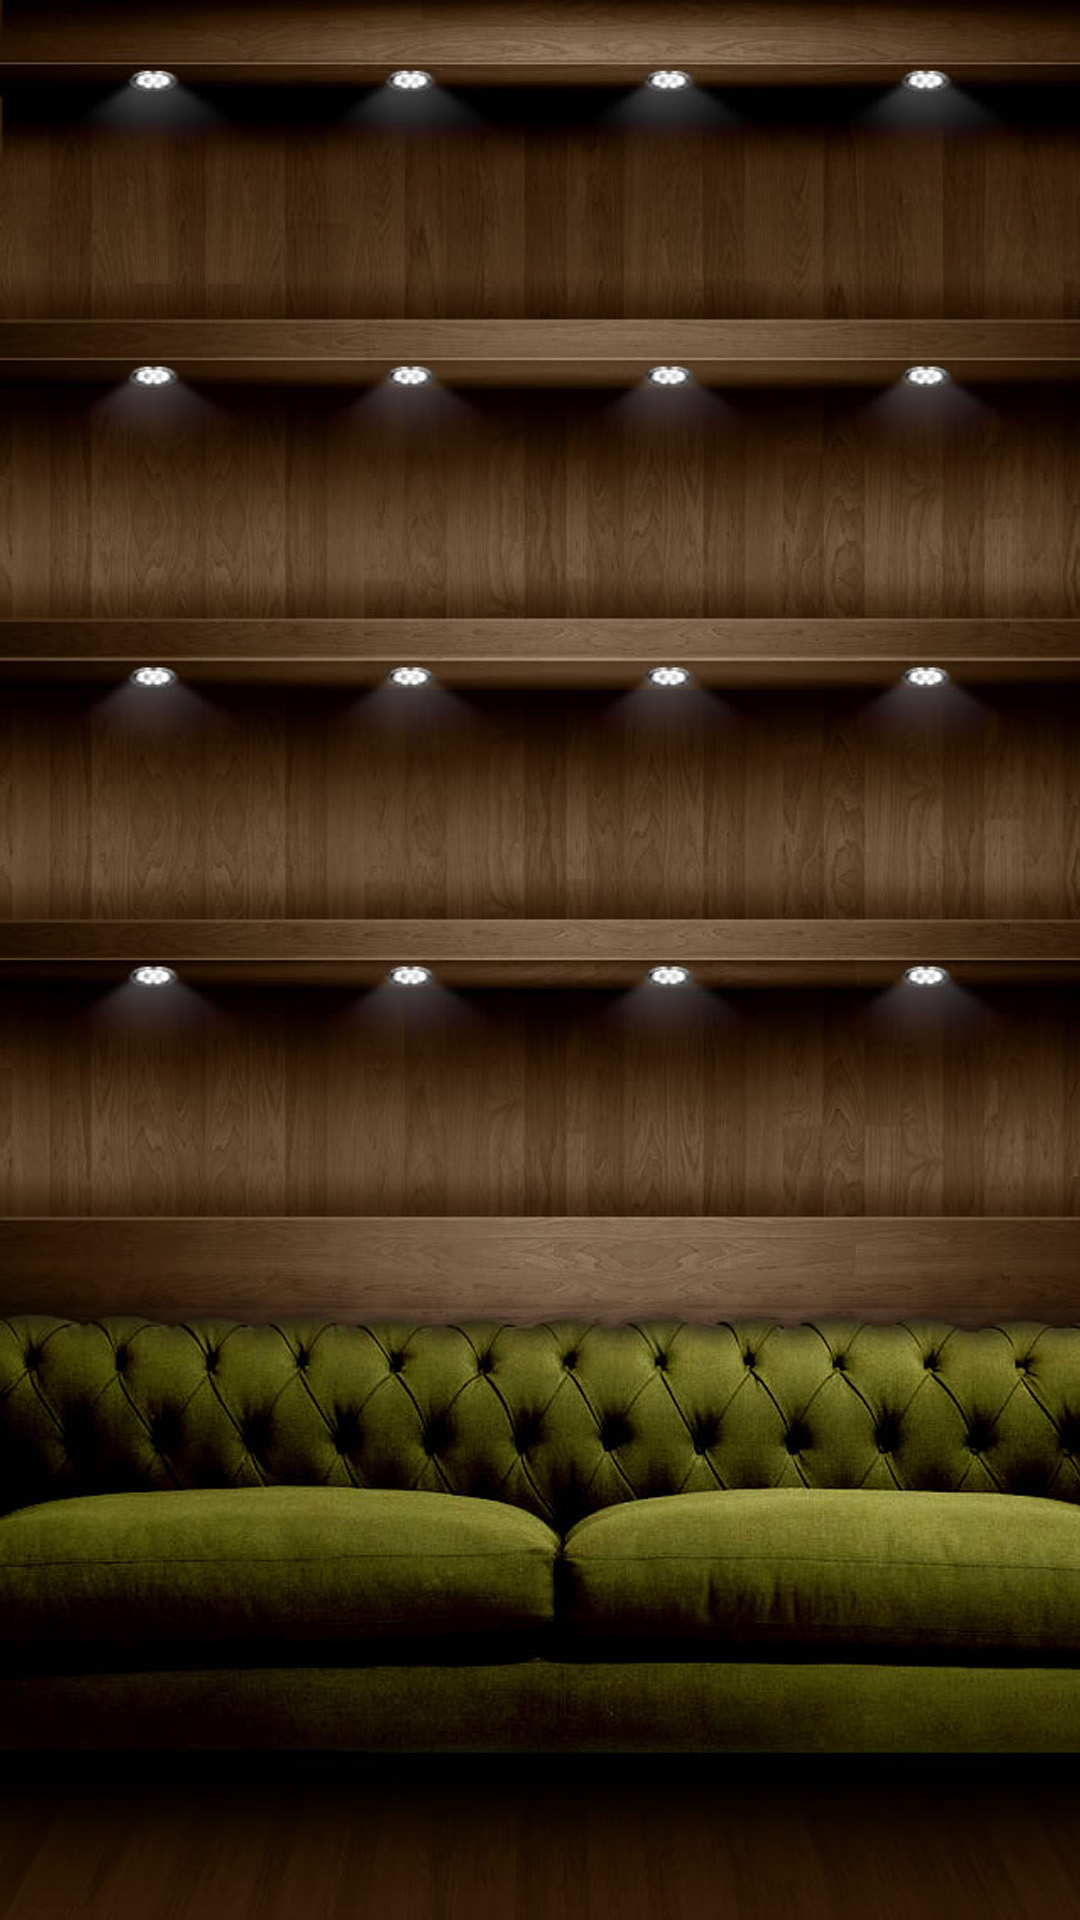 Free Download Shelf Iphone 6 Plus Wallpaper Iphone 6 Plus Wallpapers Hd 1080x19 For Your Desktop Mobile Tablet Explore 50 Iphone 6 Shelf Wallpaper Iphone 5 Shelf Wallpaper App Shelf Wallpaper Shelf Desktop Wallpaper